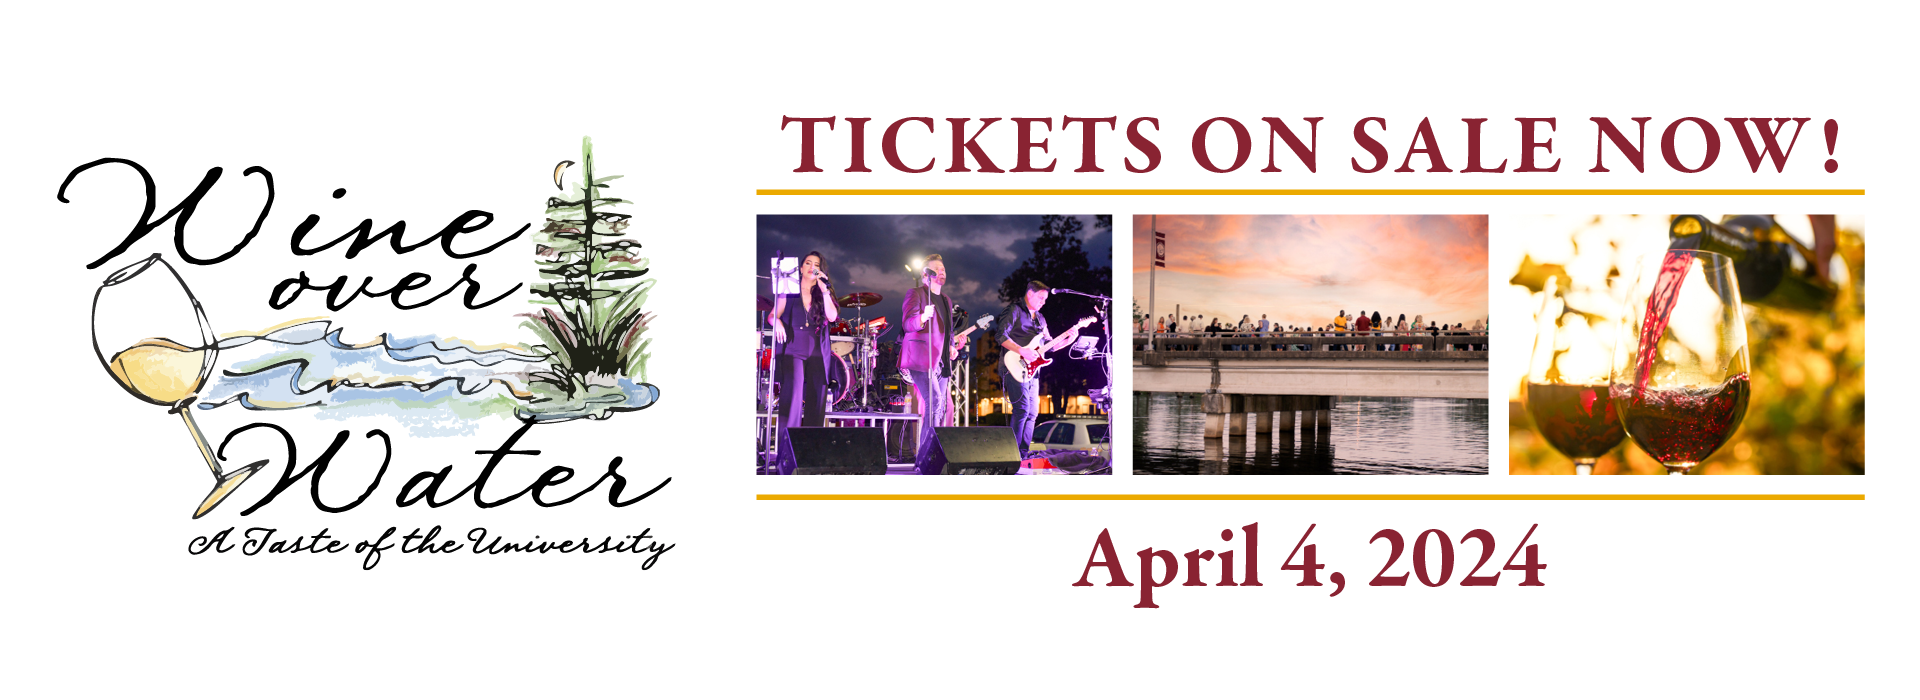 Wine Over Water Tickets on Sale Now